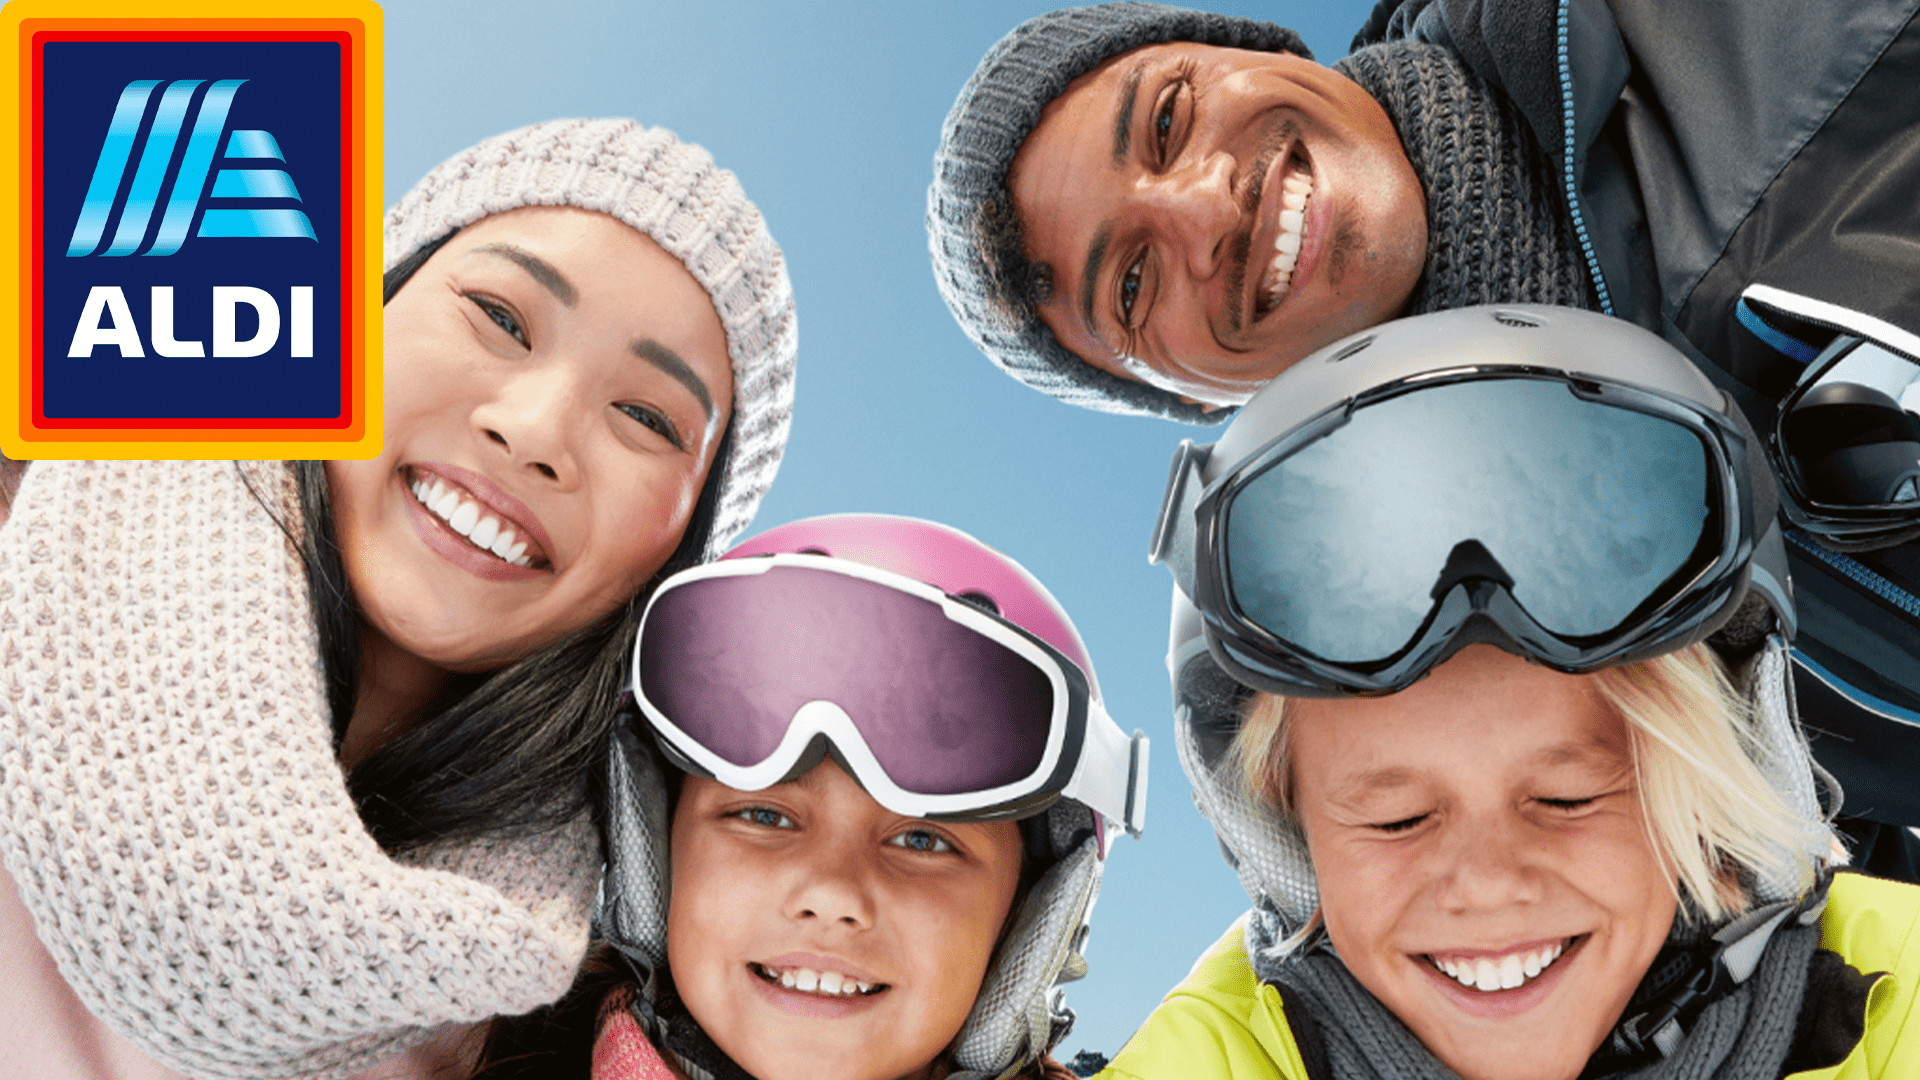 ALDI snow gear catalogue: The Special Buys sale is back, find out